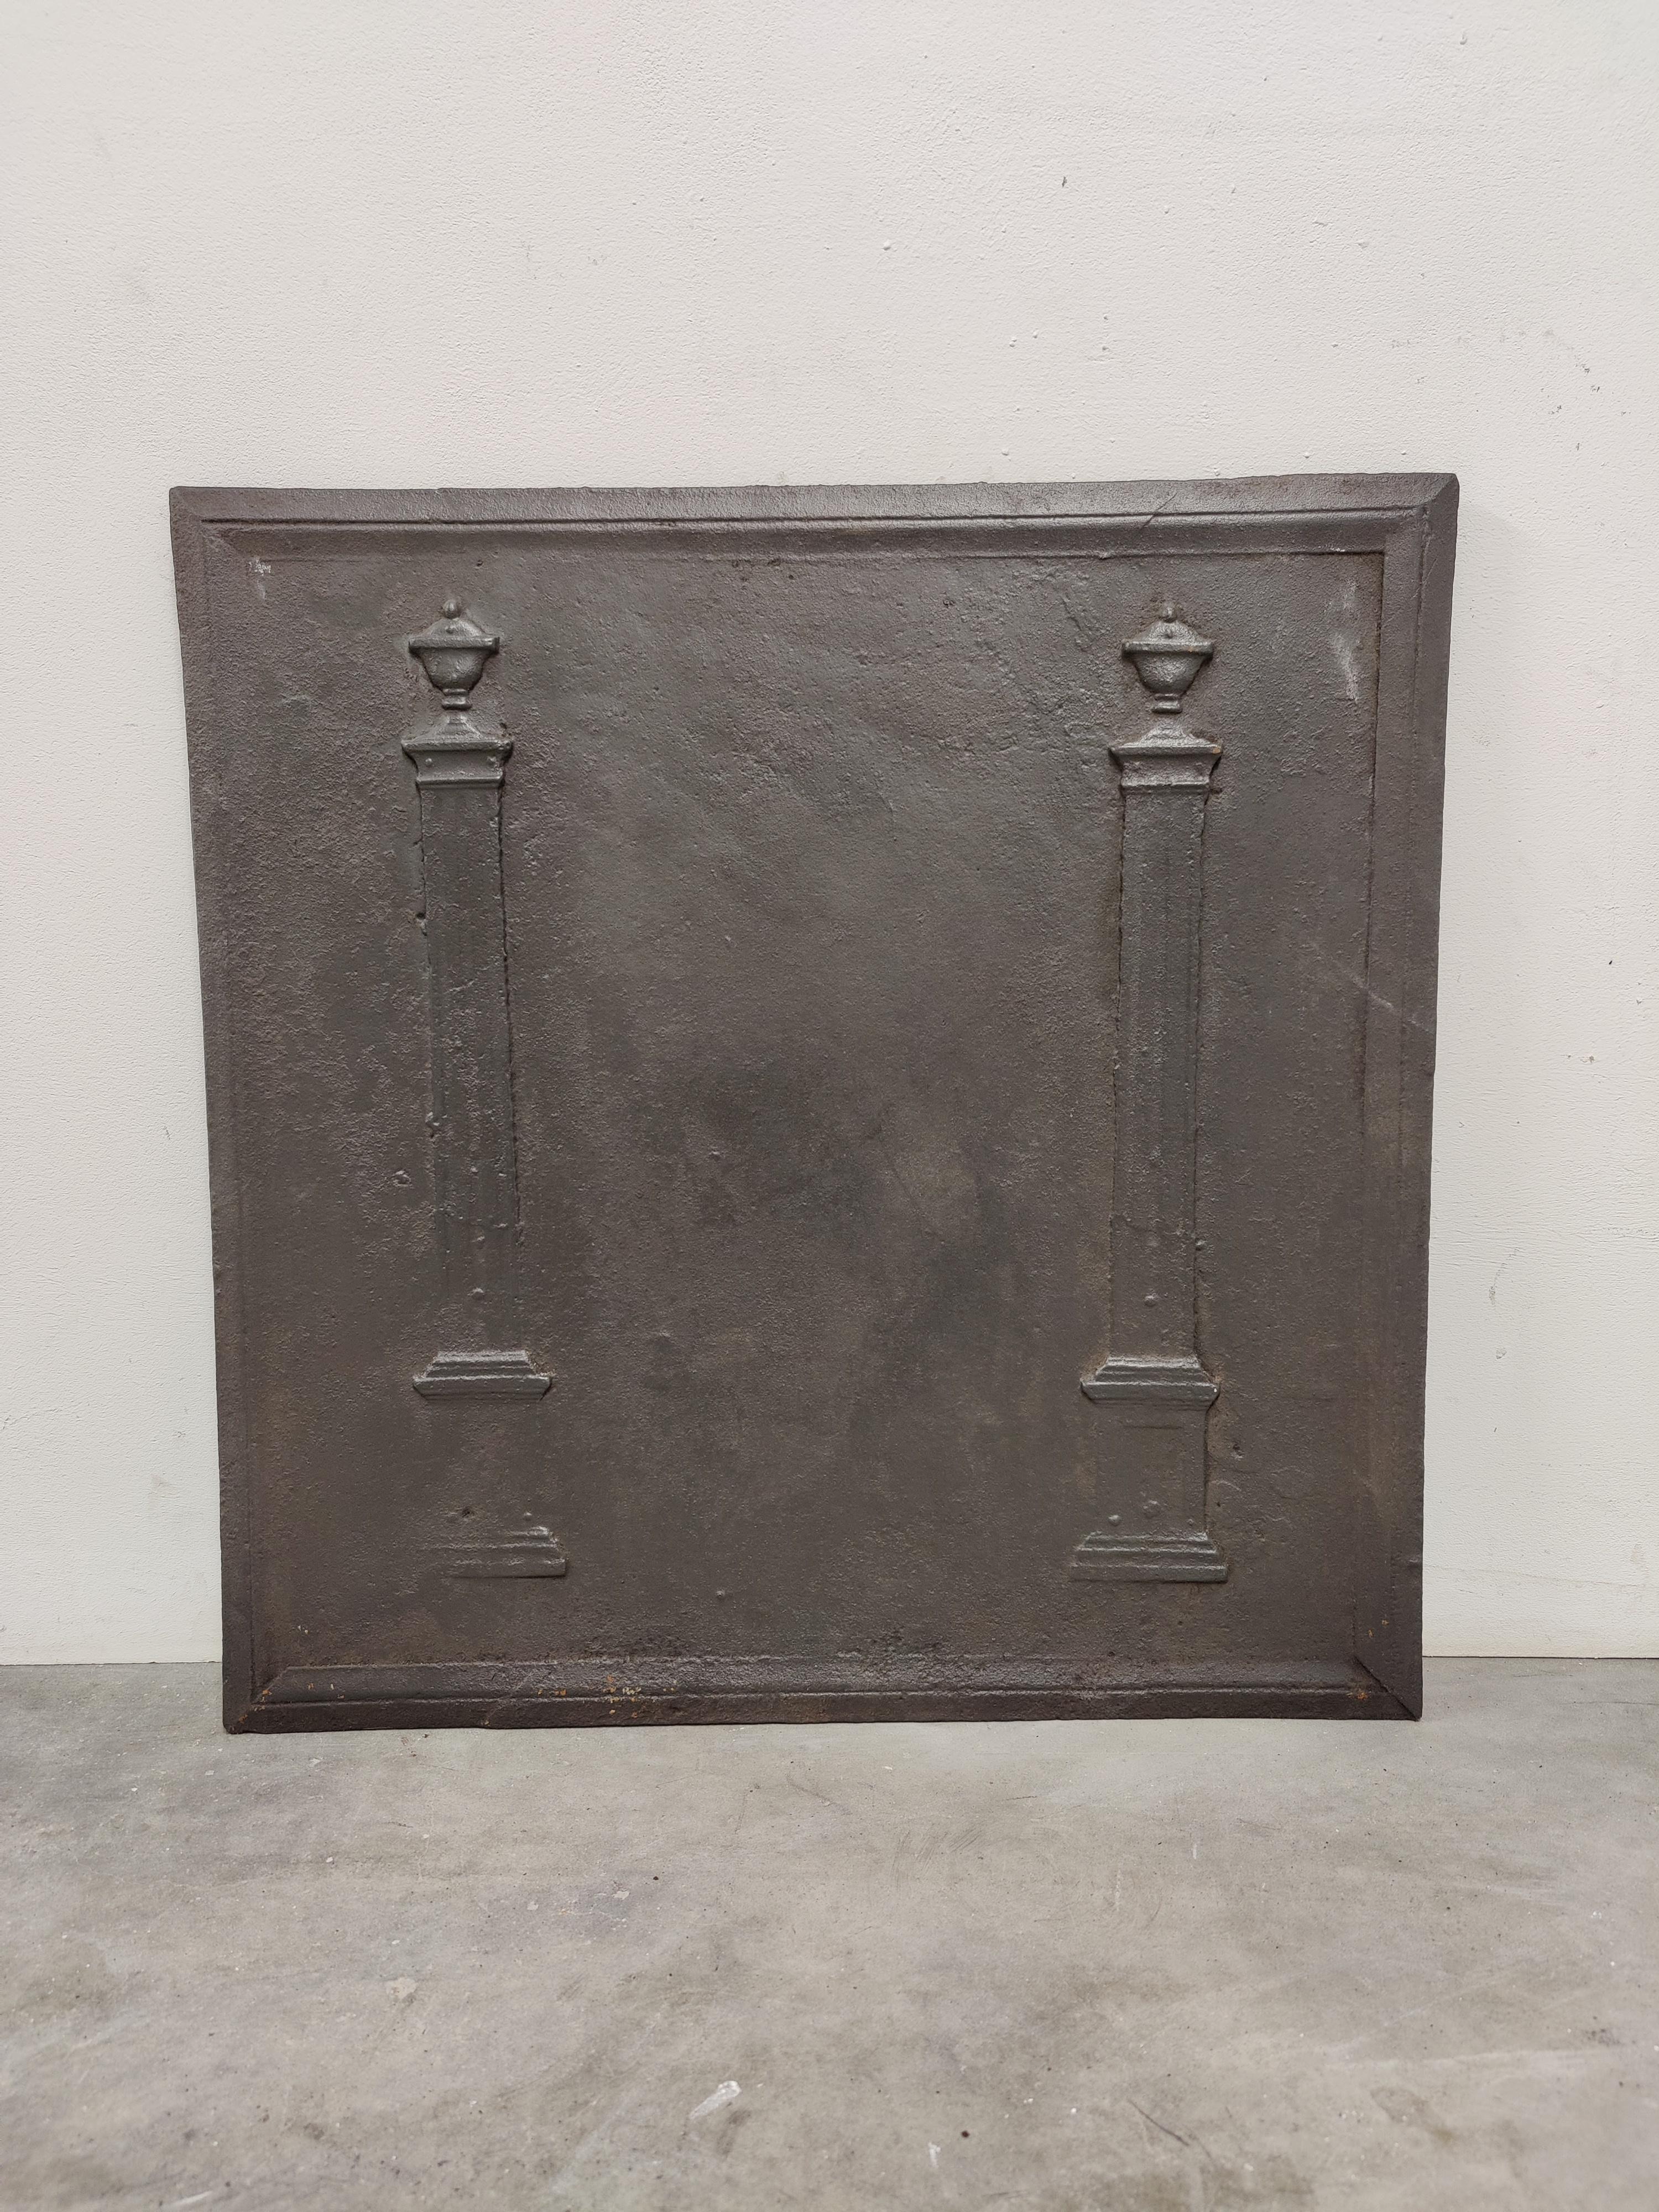 Antique fireback / backsplash with two architectural pillars.

Nice square cast iron antique fireback displaying two pillars.
Great condition, can be used in a real gas or log fire.
Very decorative piece.
75 lbs / 34 kg.
 
 
    